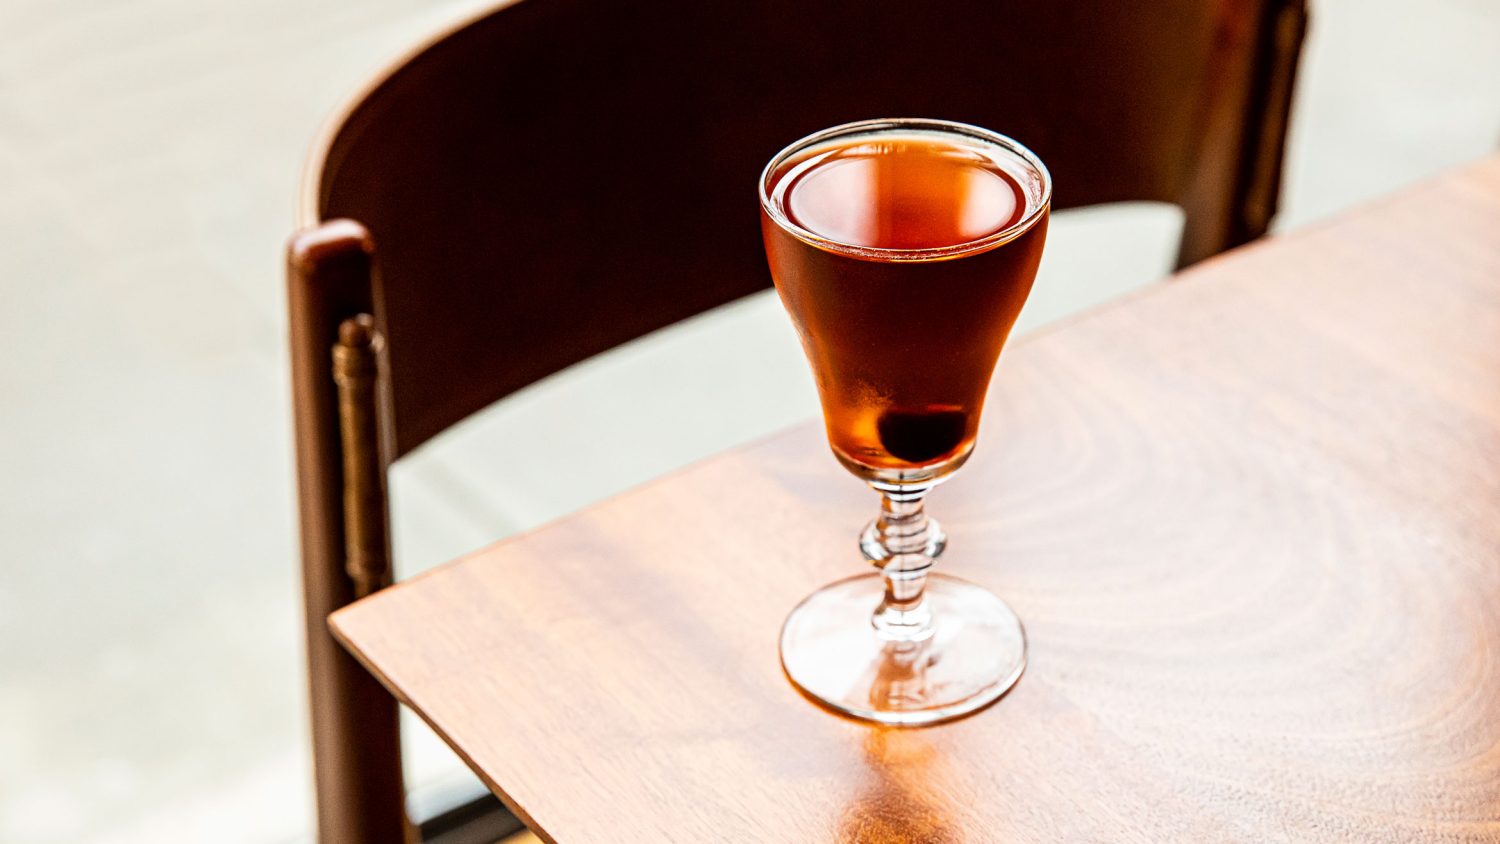 A brown-hued drink in a glass on a table